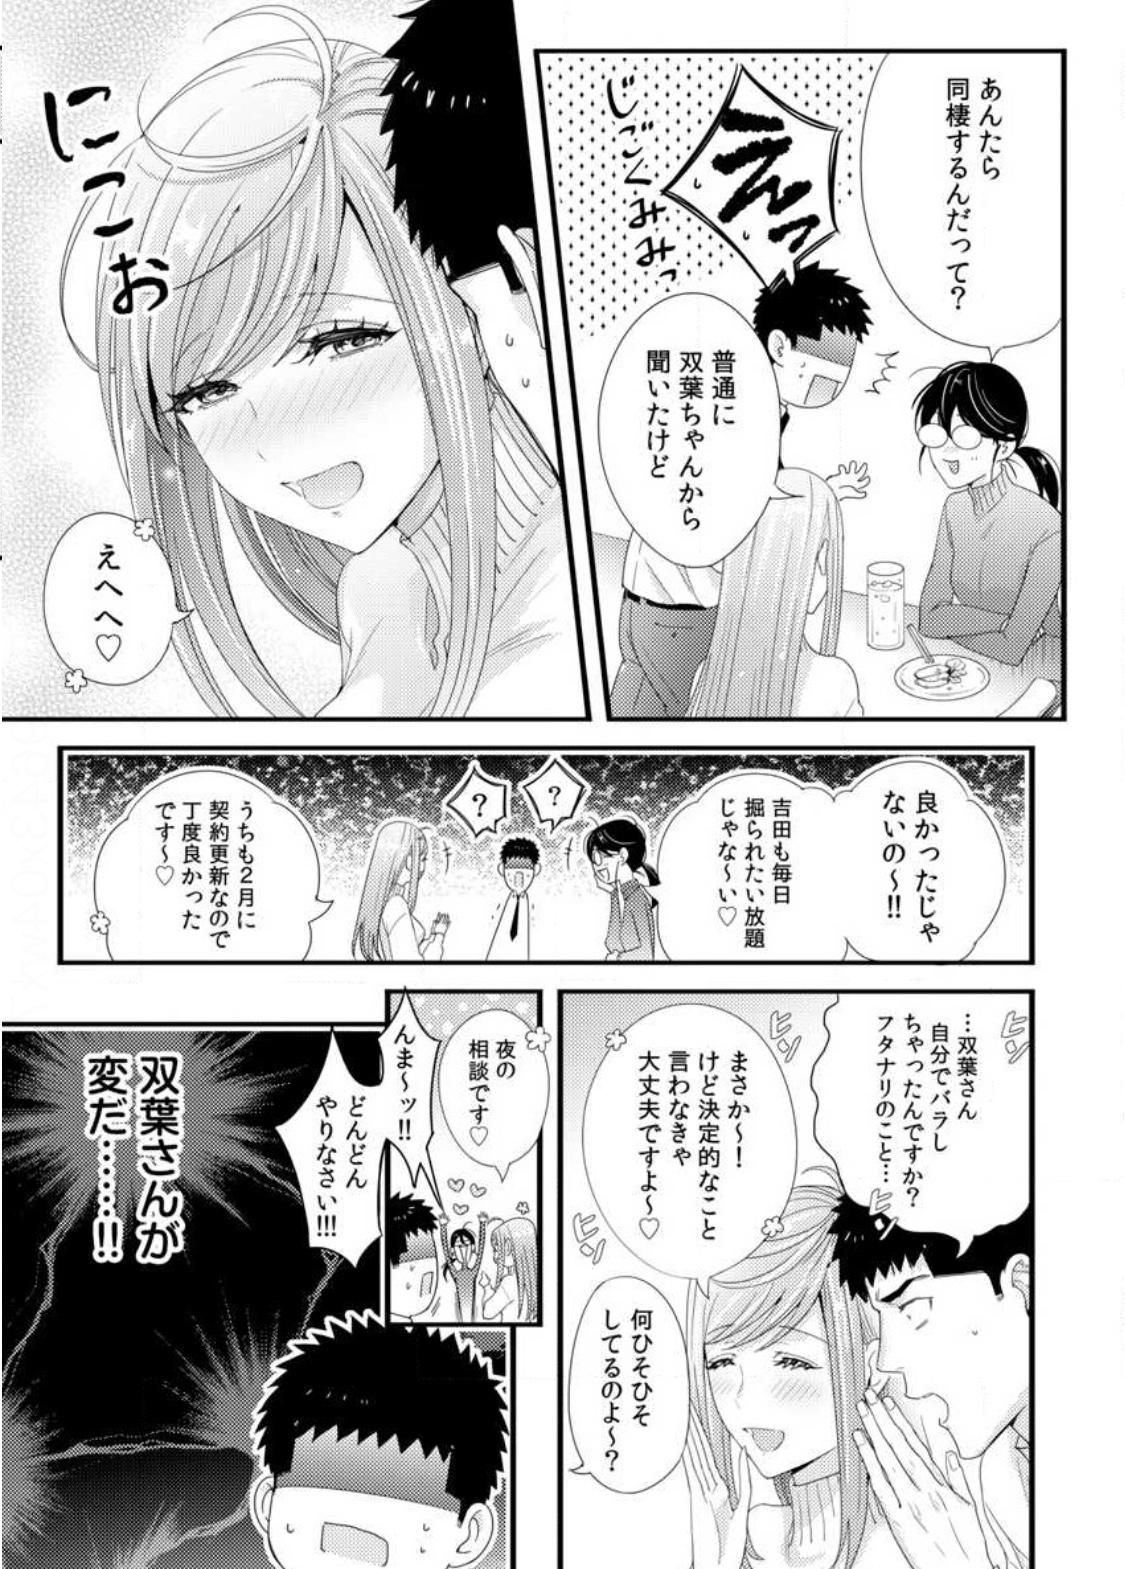 Please Let Me Hold You Futaba-San! Ch. 1-4 83